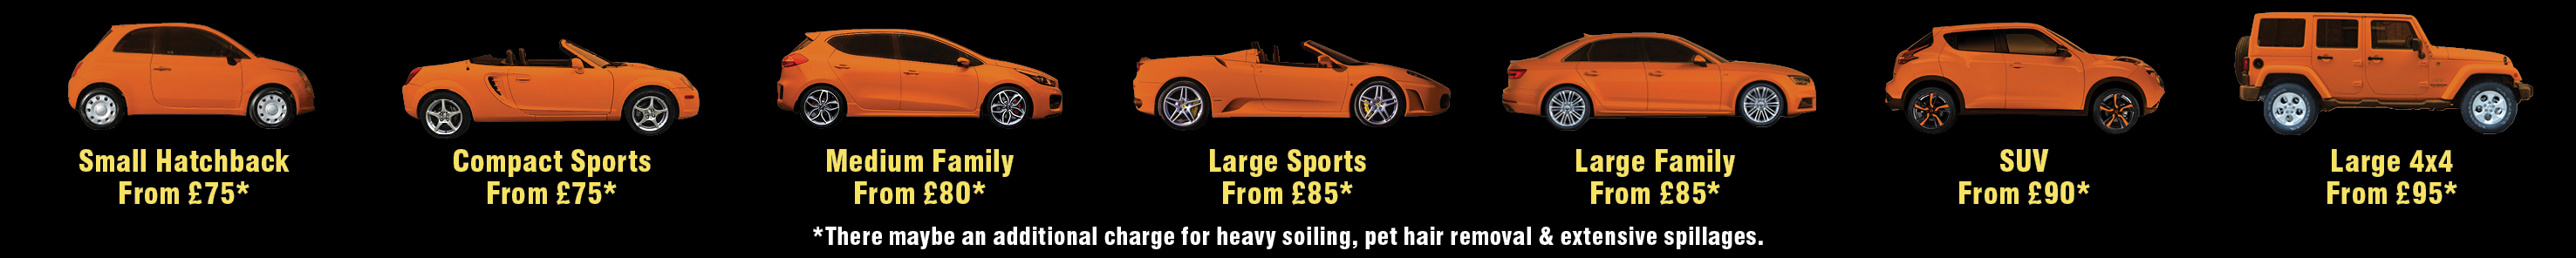 image banner showing car sizes and prices. Small hatchback from £75. Large 4x4 from £95.